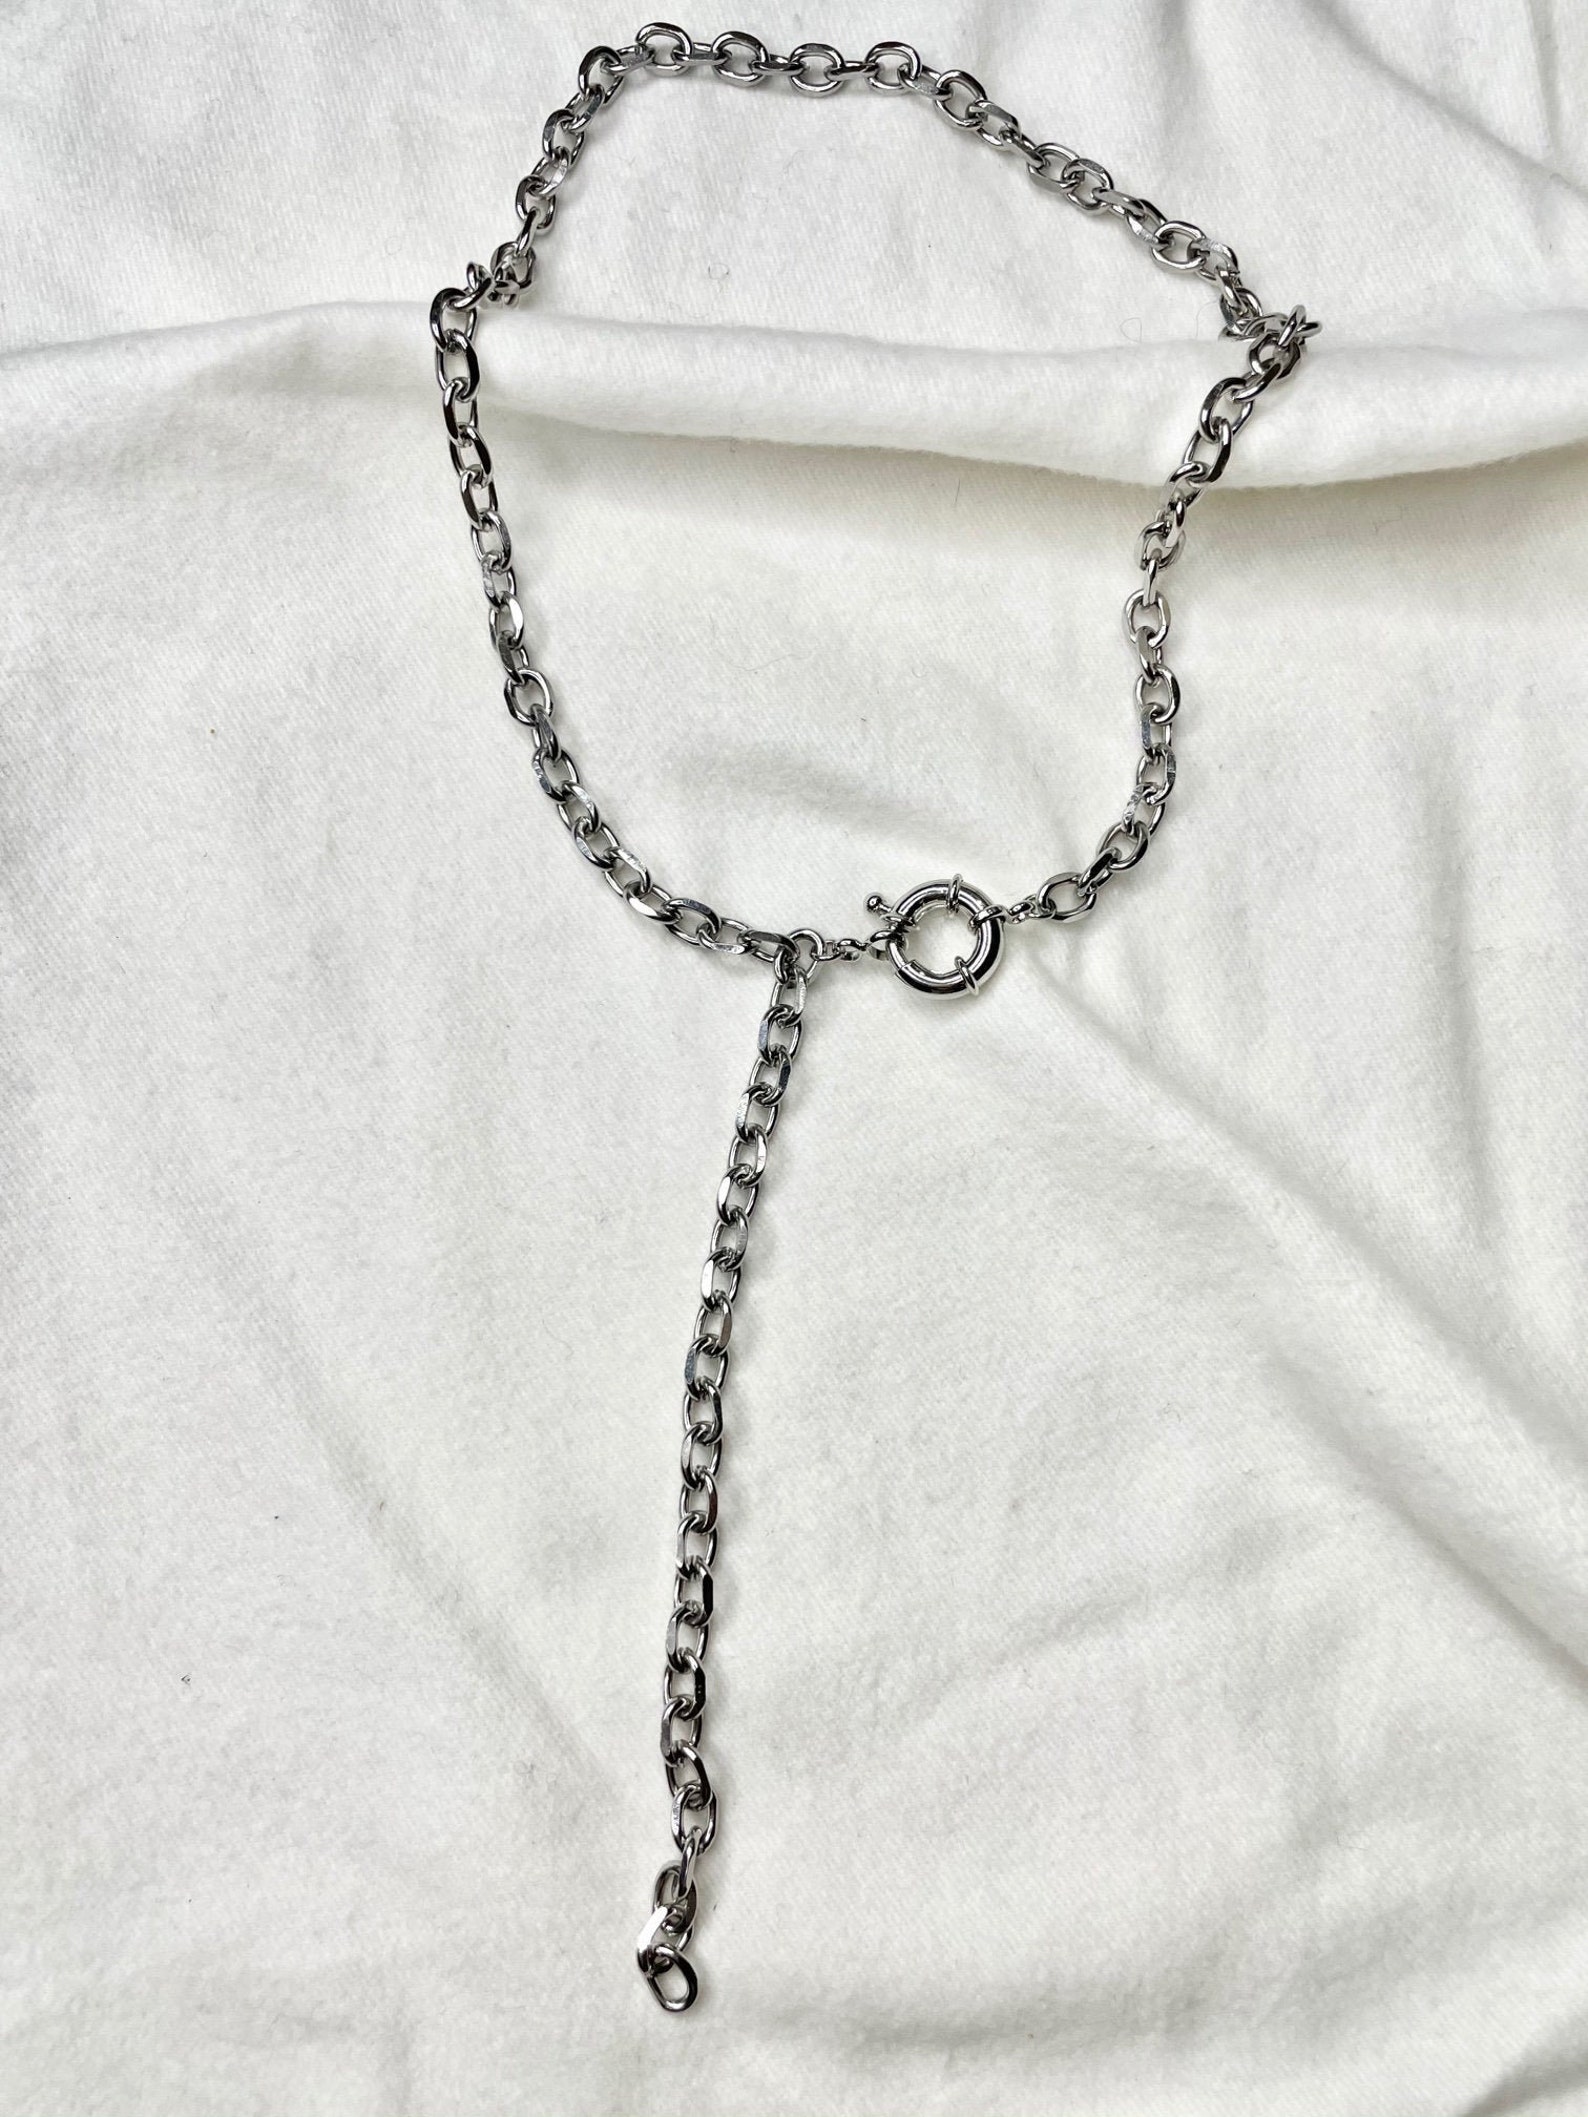 Chunky Silver Lariat Necklace Silver Y Necklace Rolo Chain | Etsy